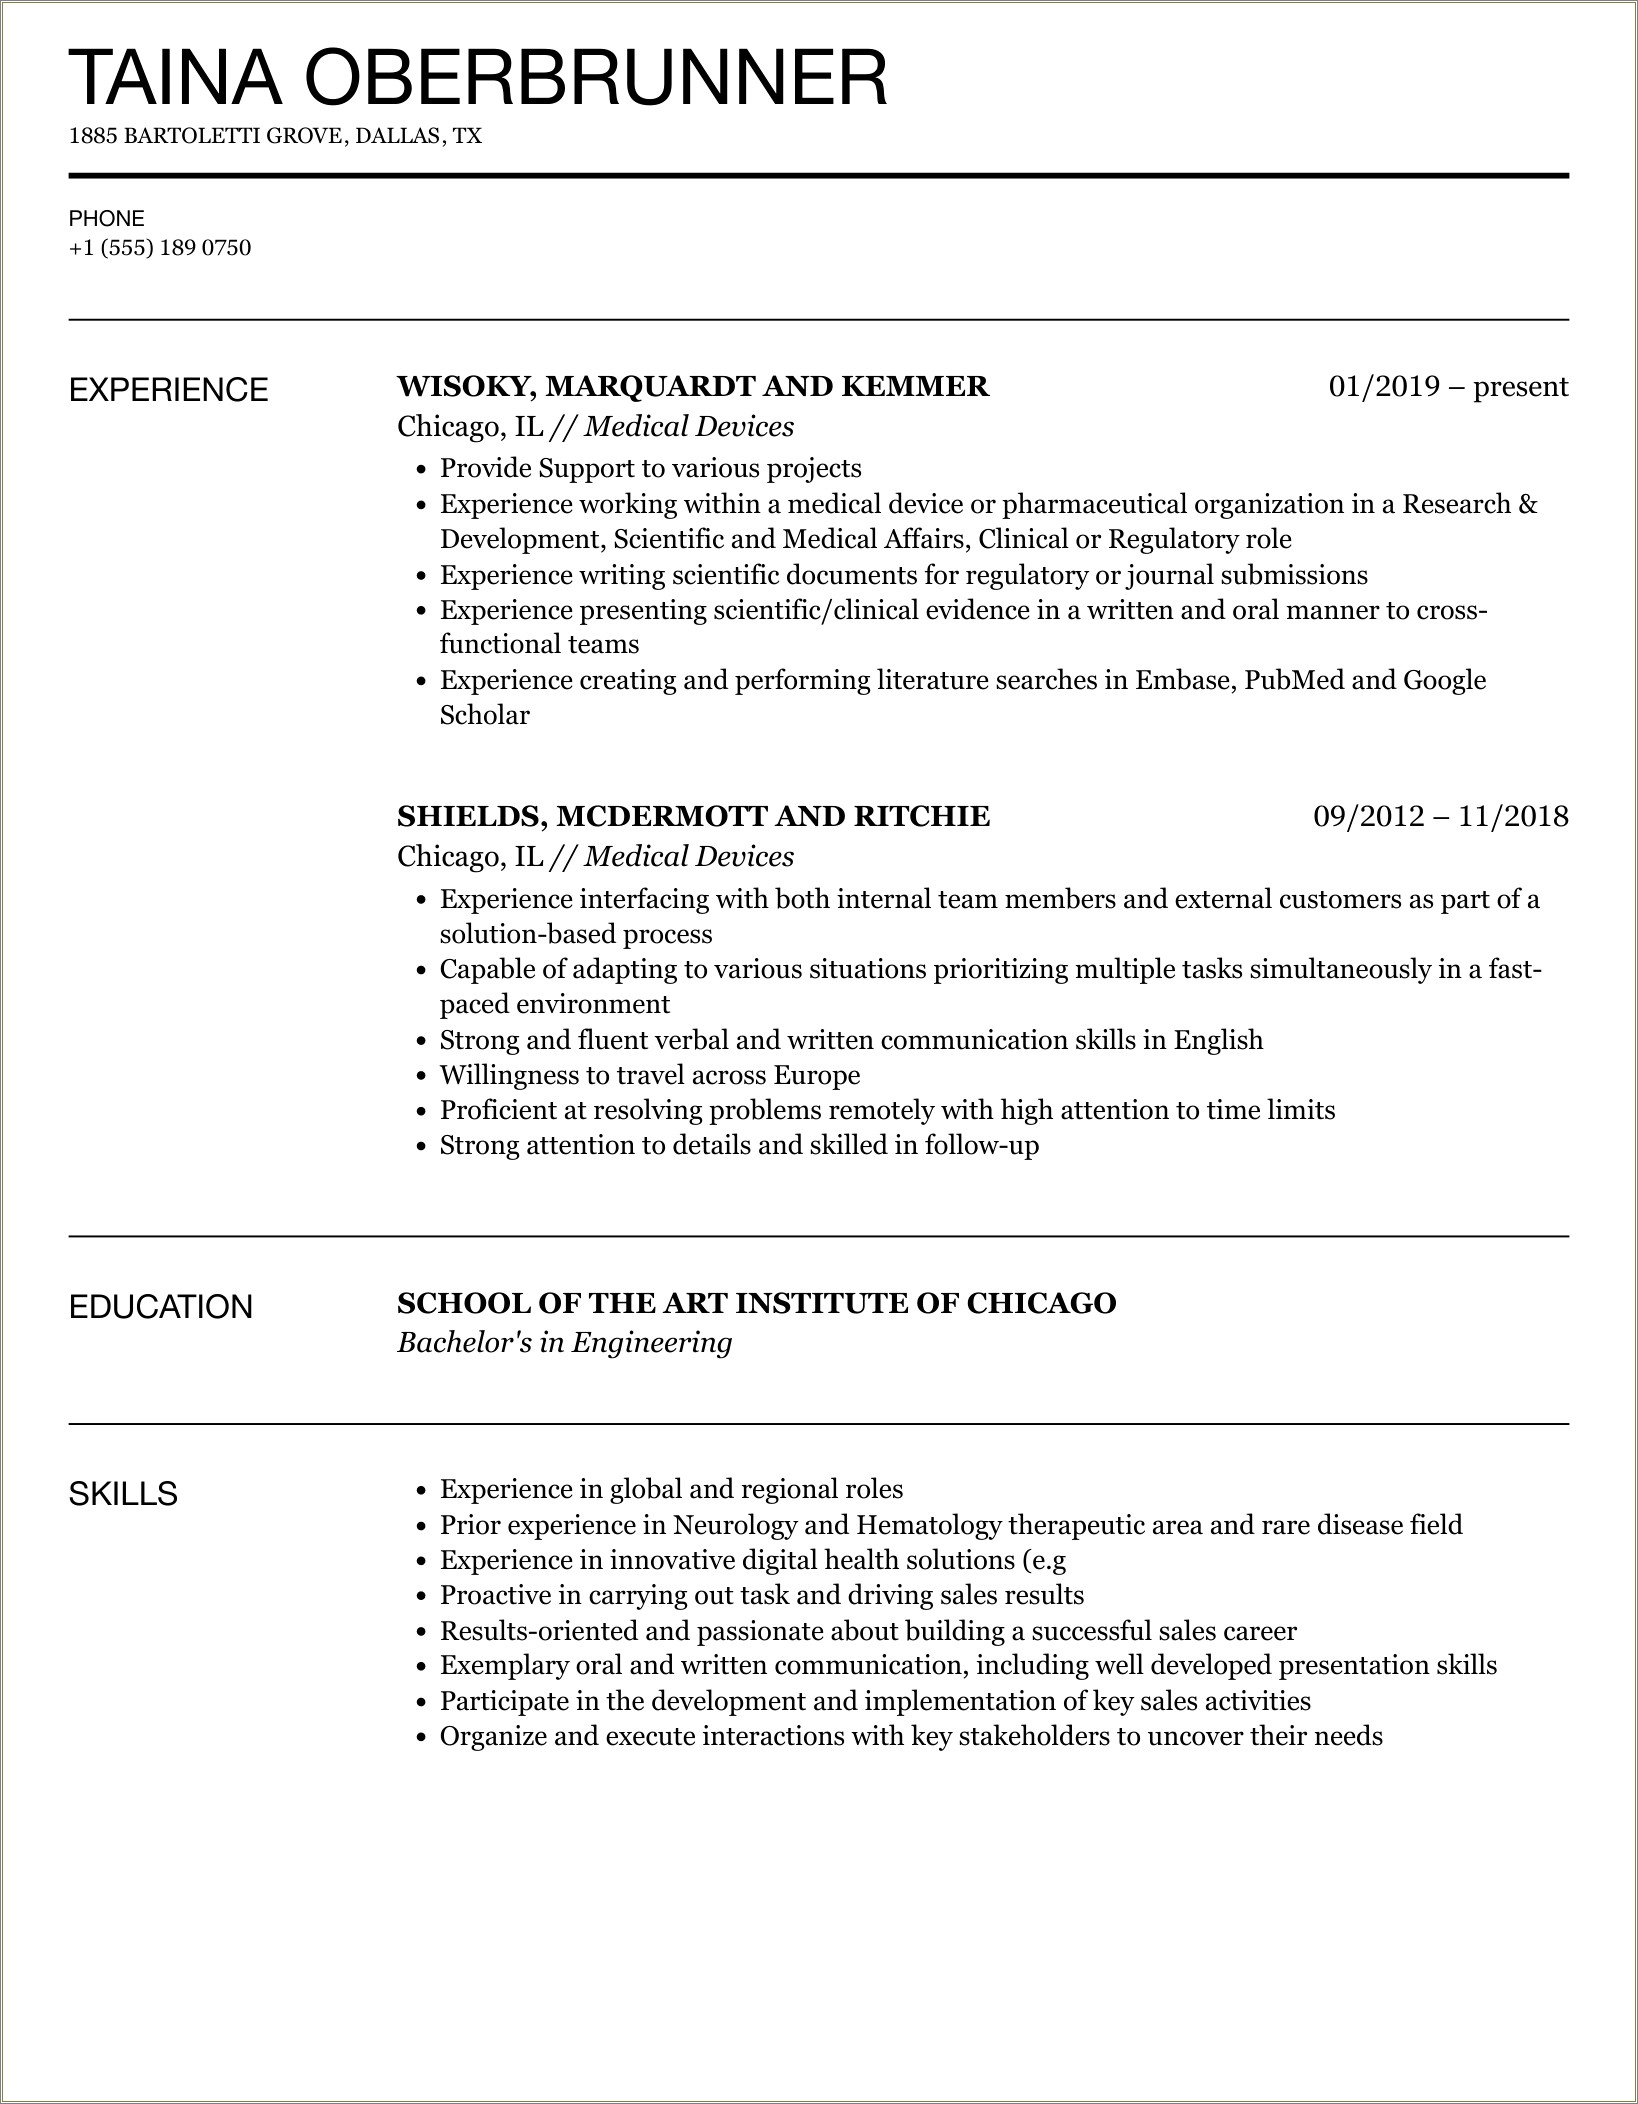 Resume Sample For Medical Device Reporting